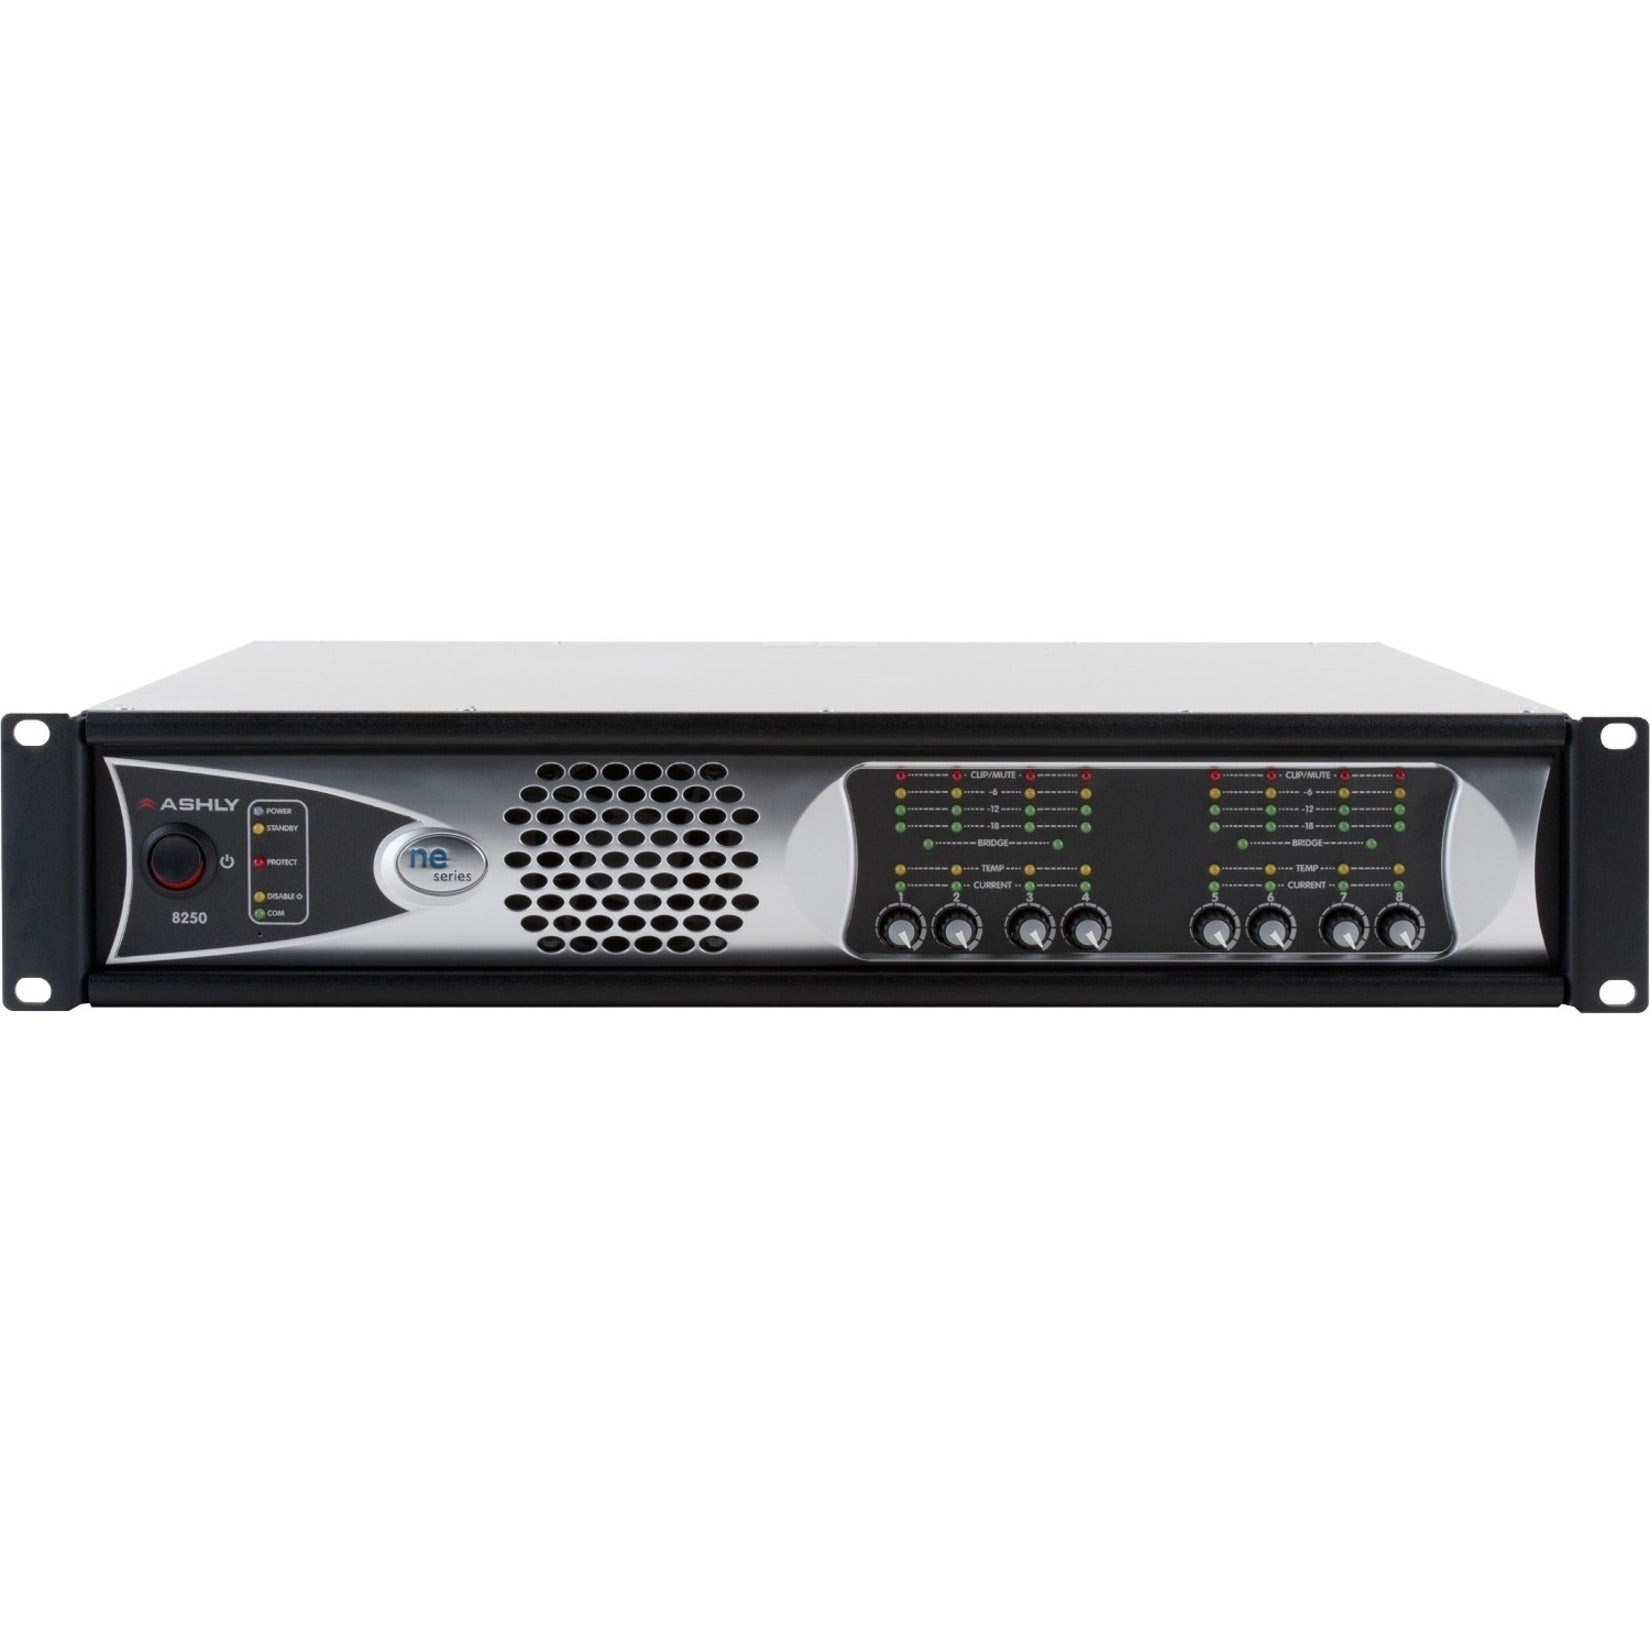 Ashly NE8250.70 Network Enabled Eight-Channel Amplifier 250W @ 70V, 8 Audio Channels, 2000W RMS Output Power